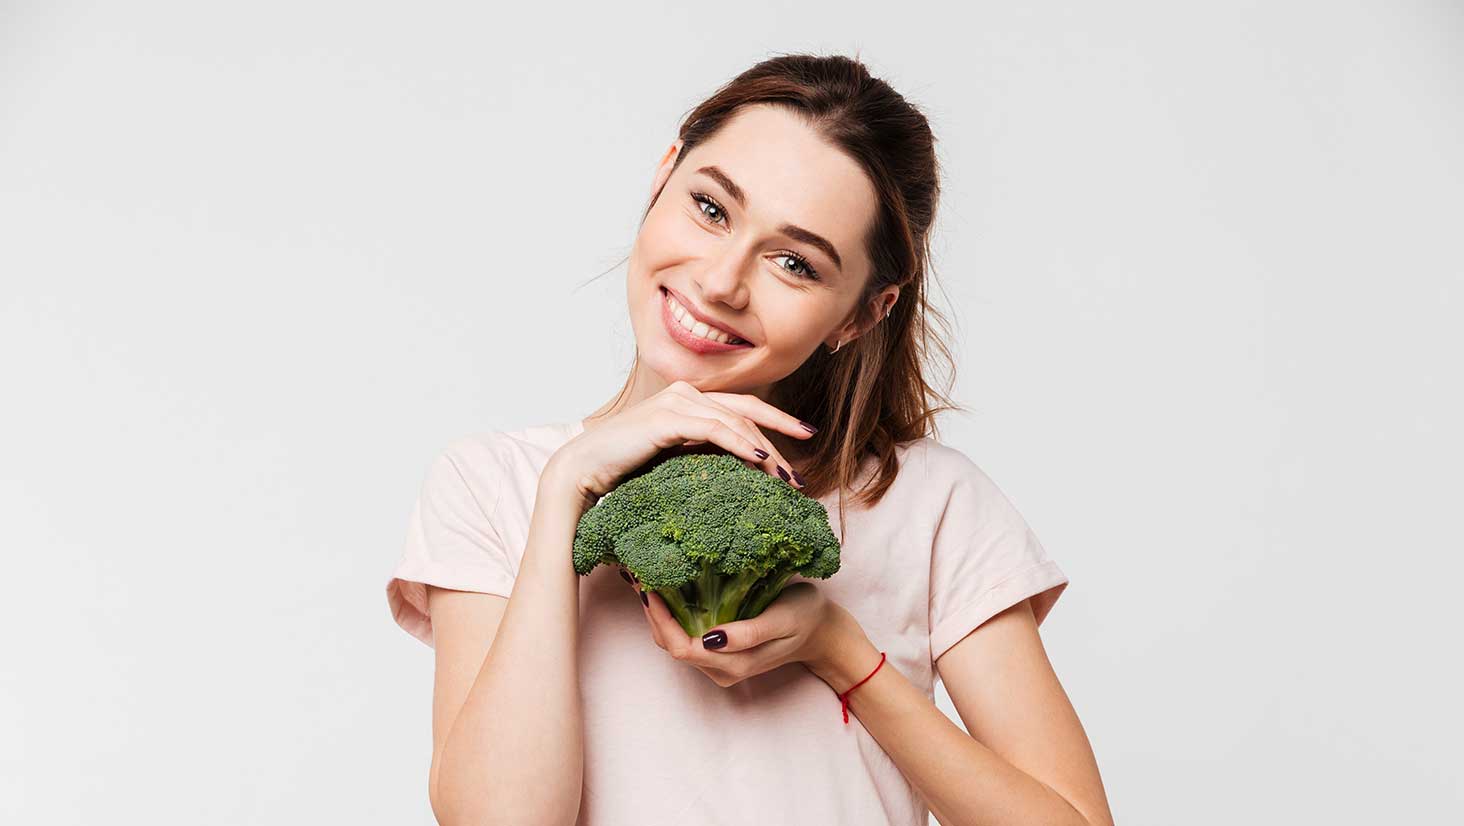 Photo of young woman holding broccoli